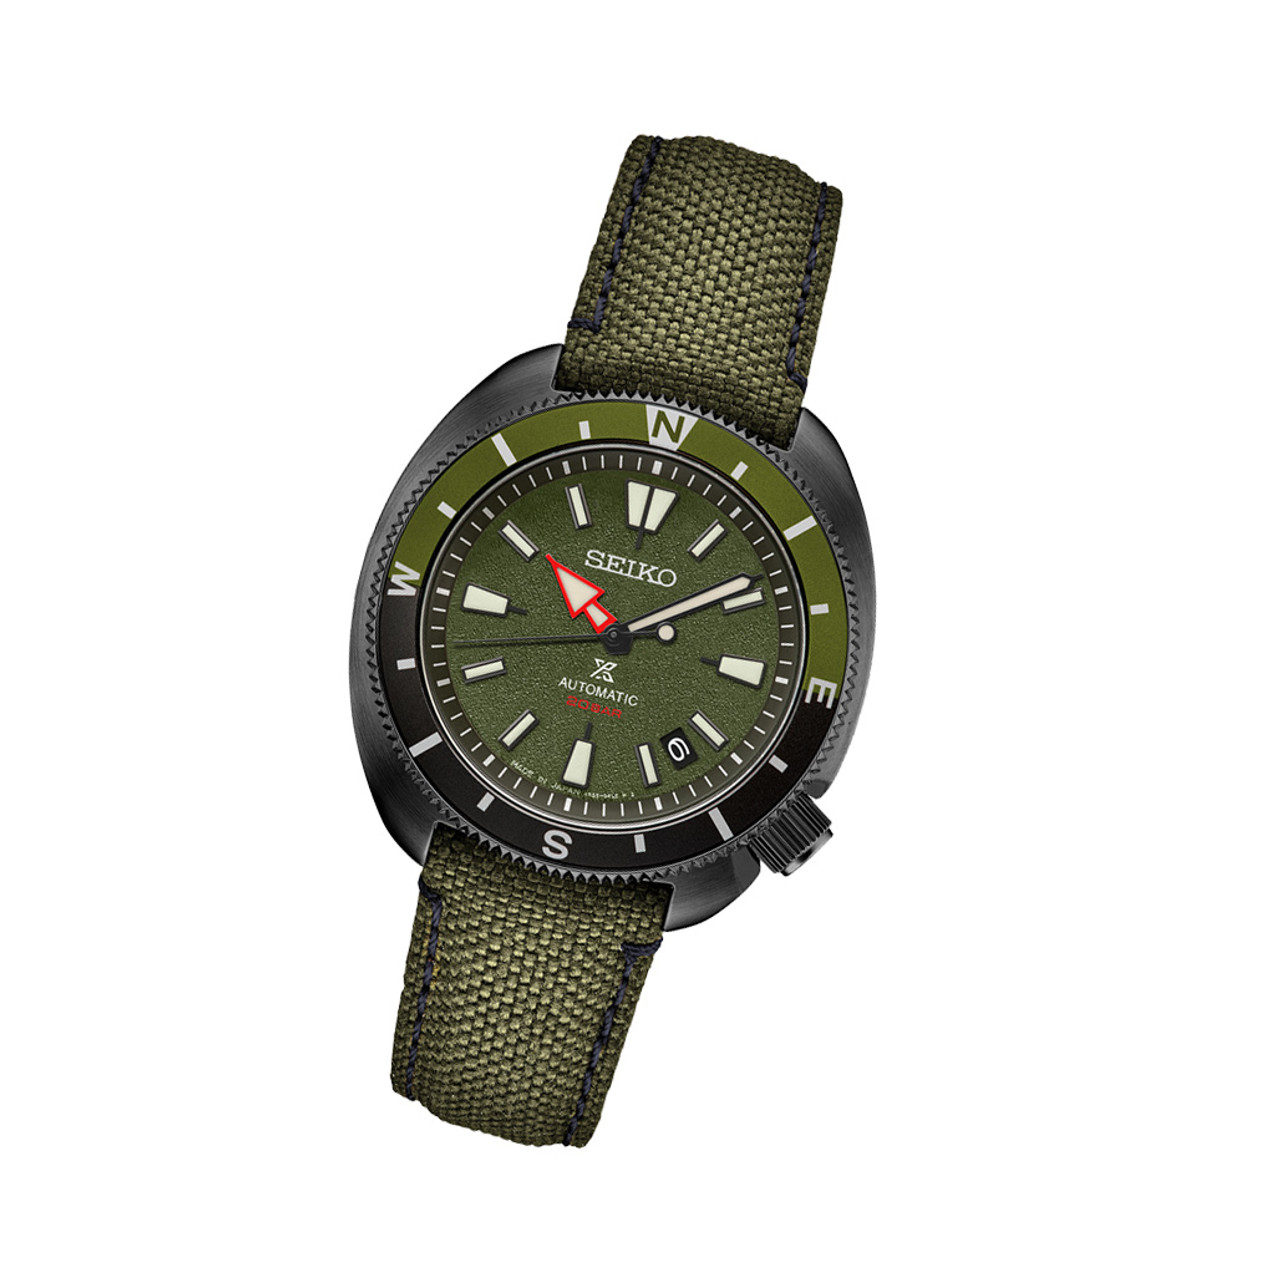 Seiko Prospex Land US Special Edition Tortoise Watch with Black Case and  Green Dial #SRPJ31